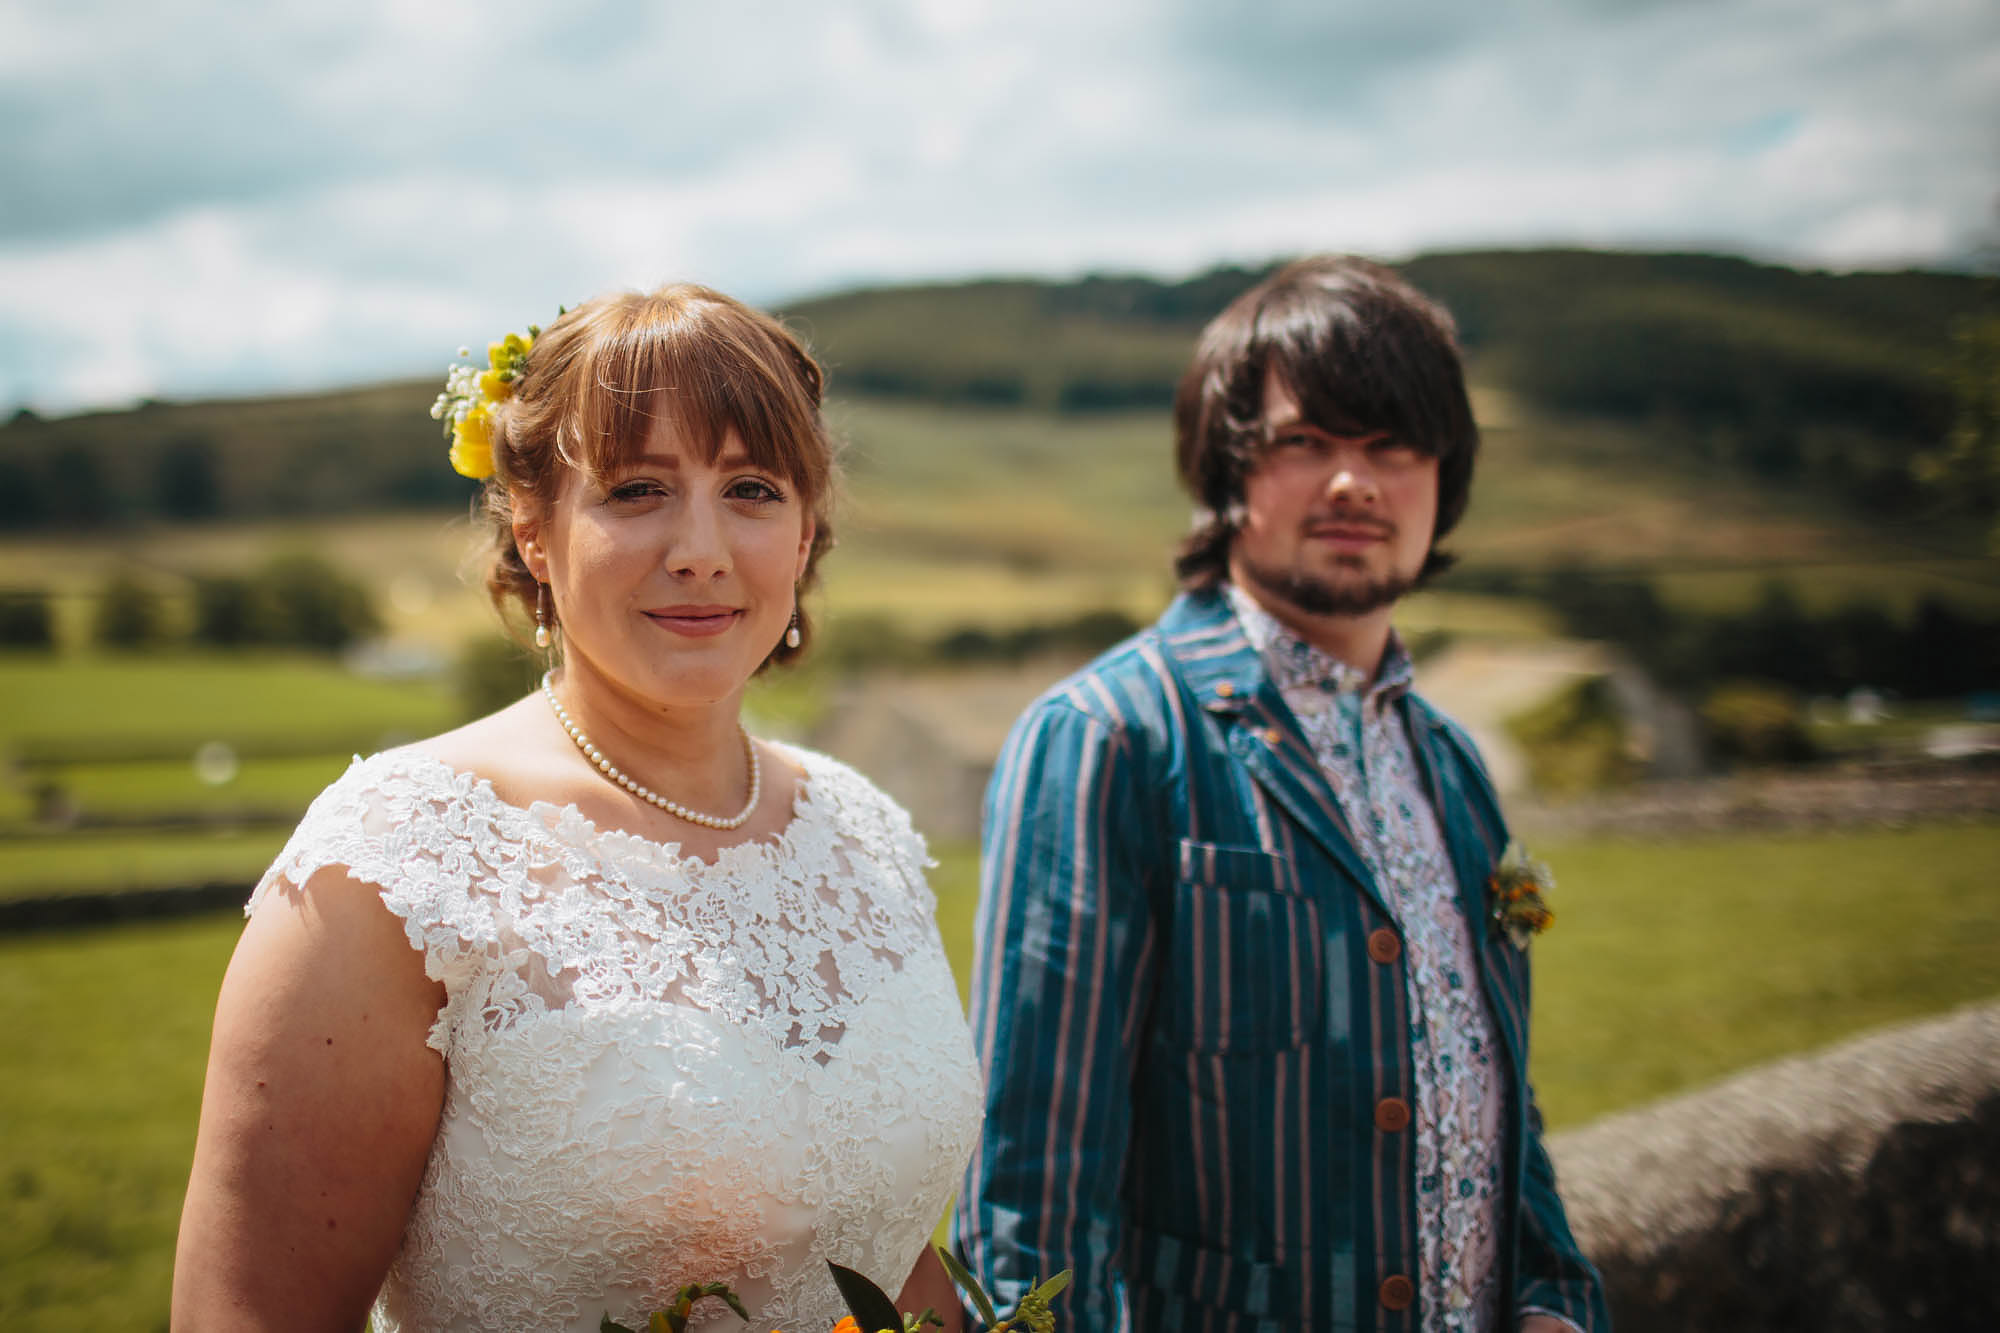 Bride and groom portrait at a Yorkshire Dales wedding